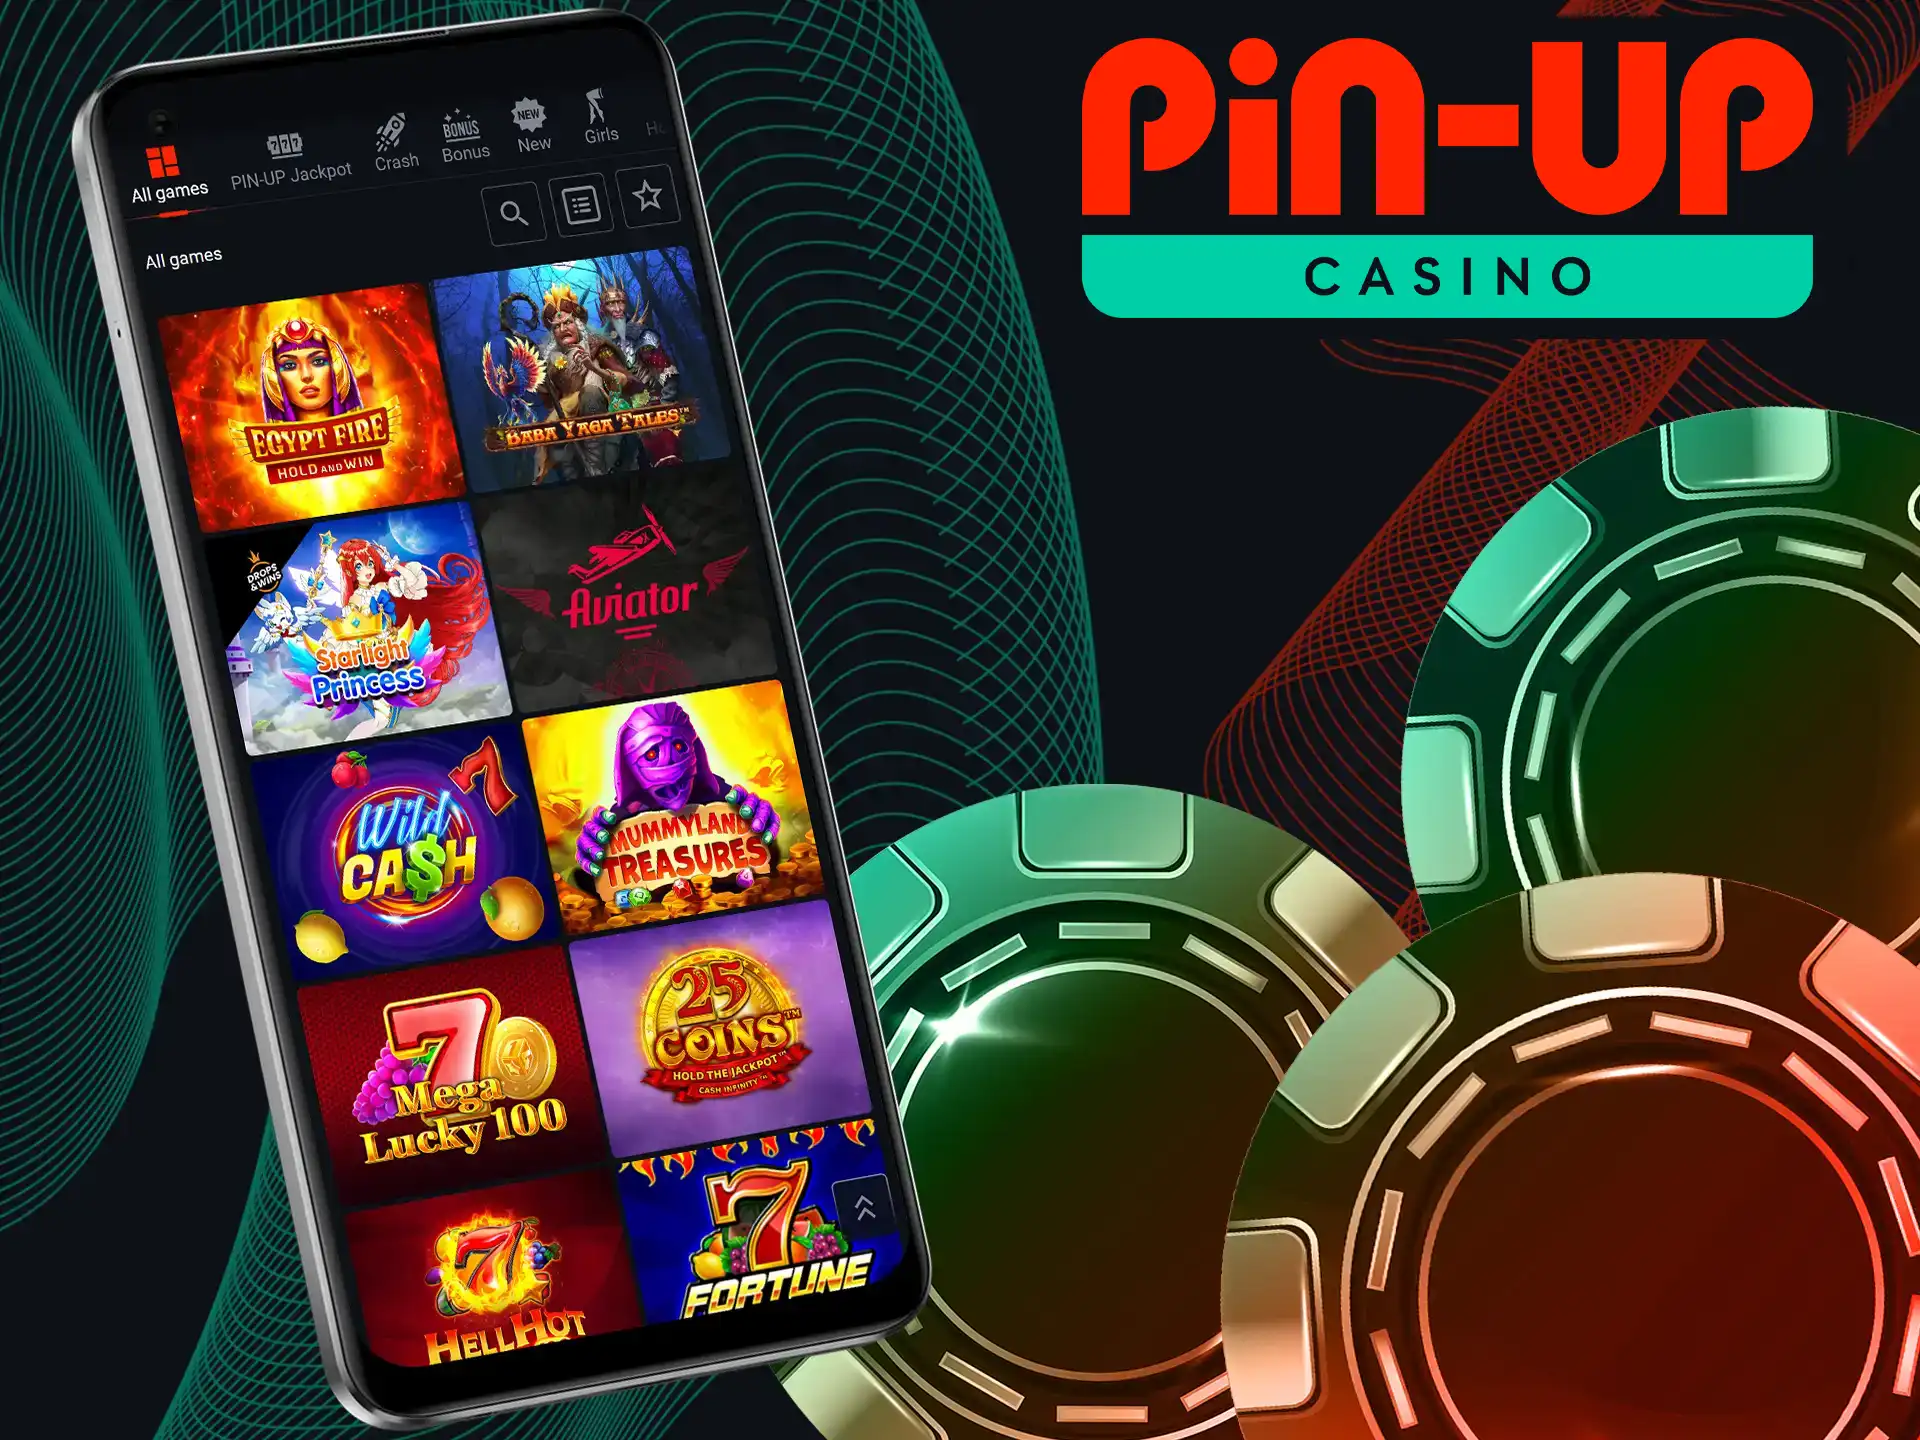 There are thousands of gambling entertainment options available to you at Pin-Up Casino.